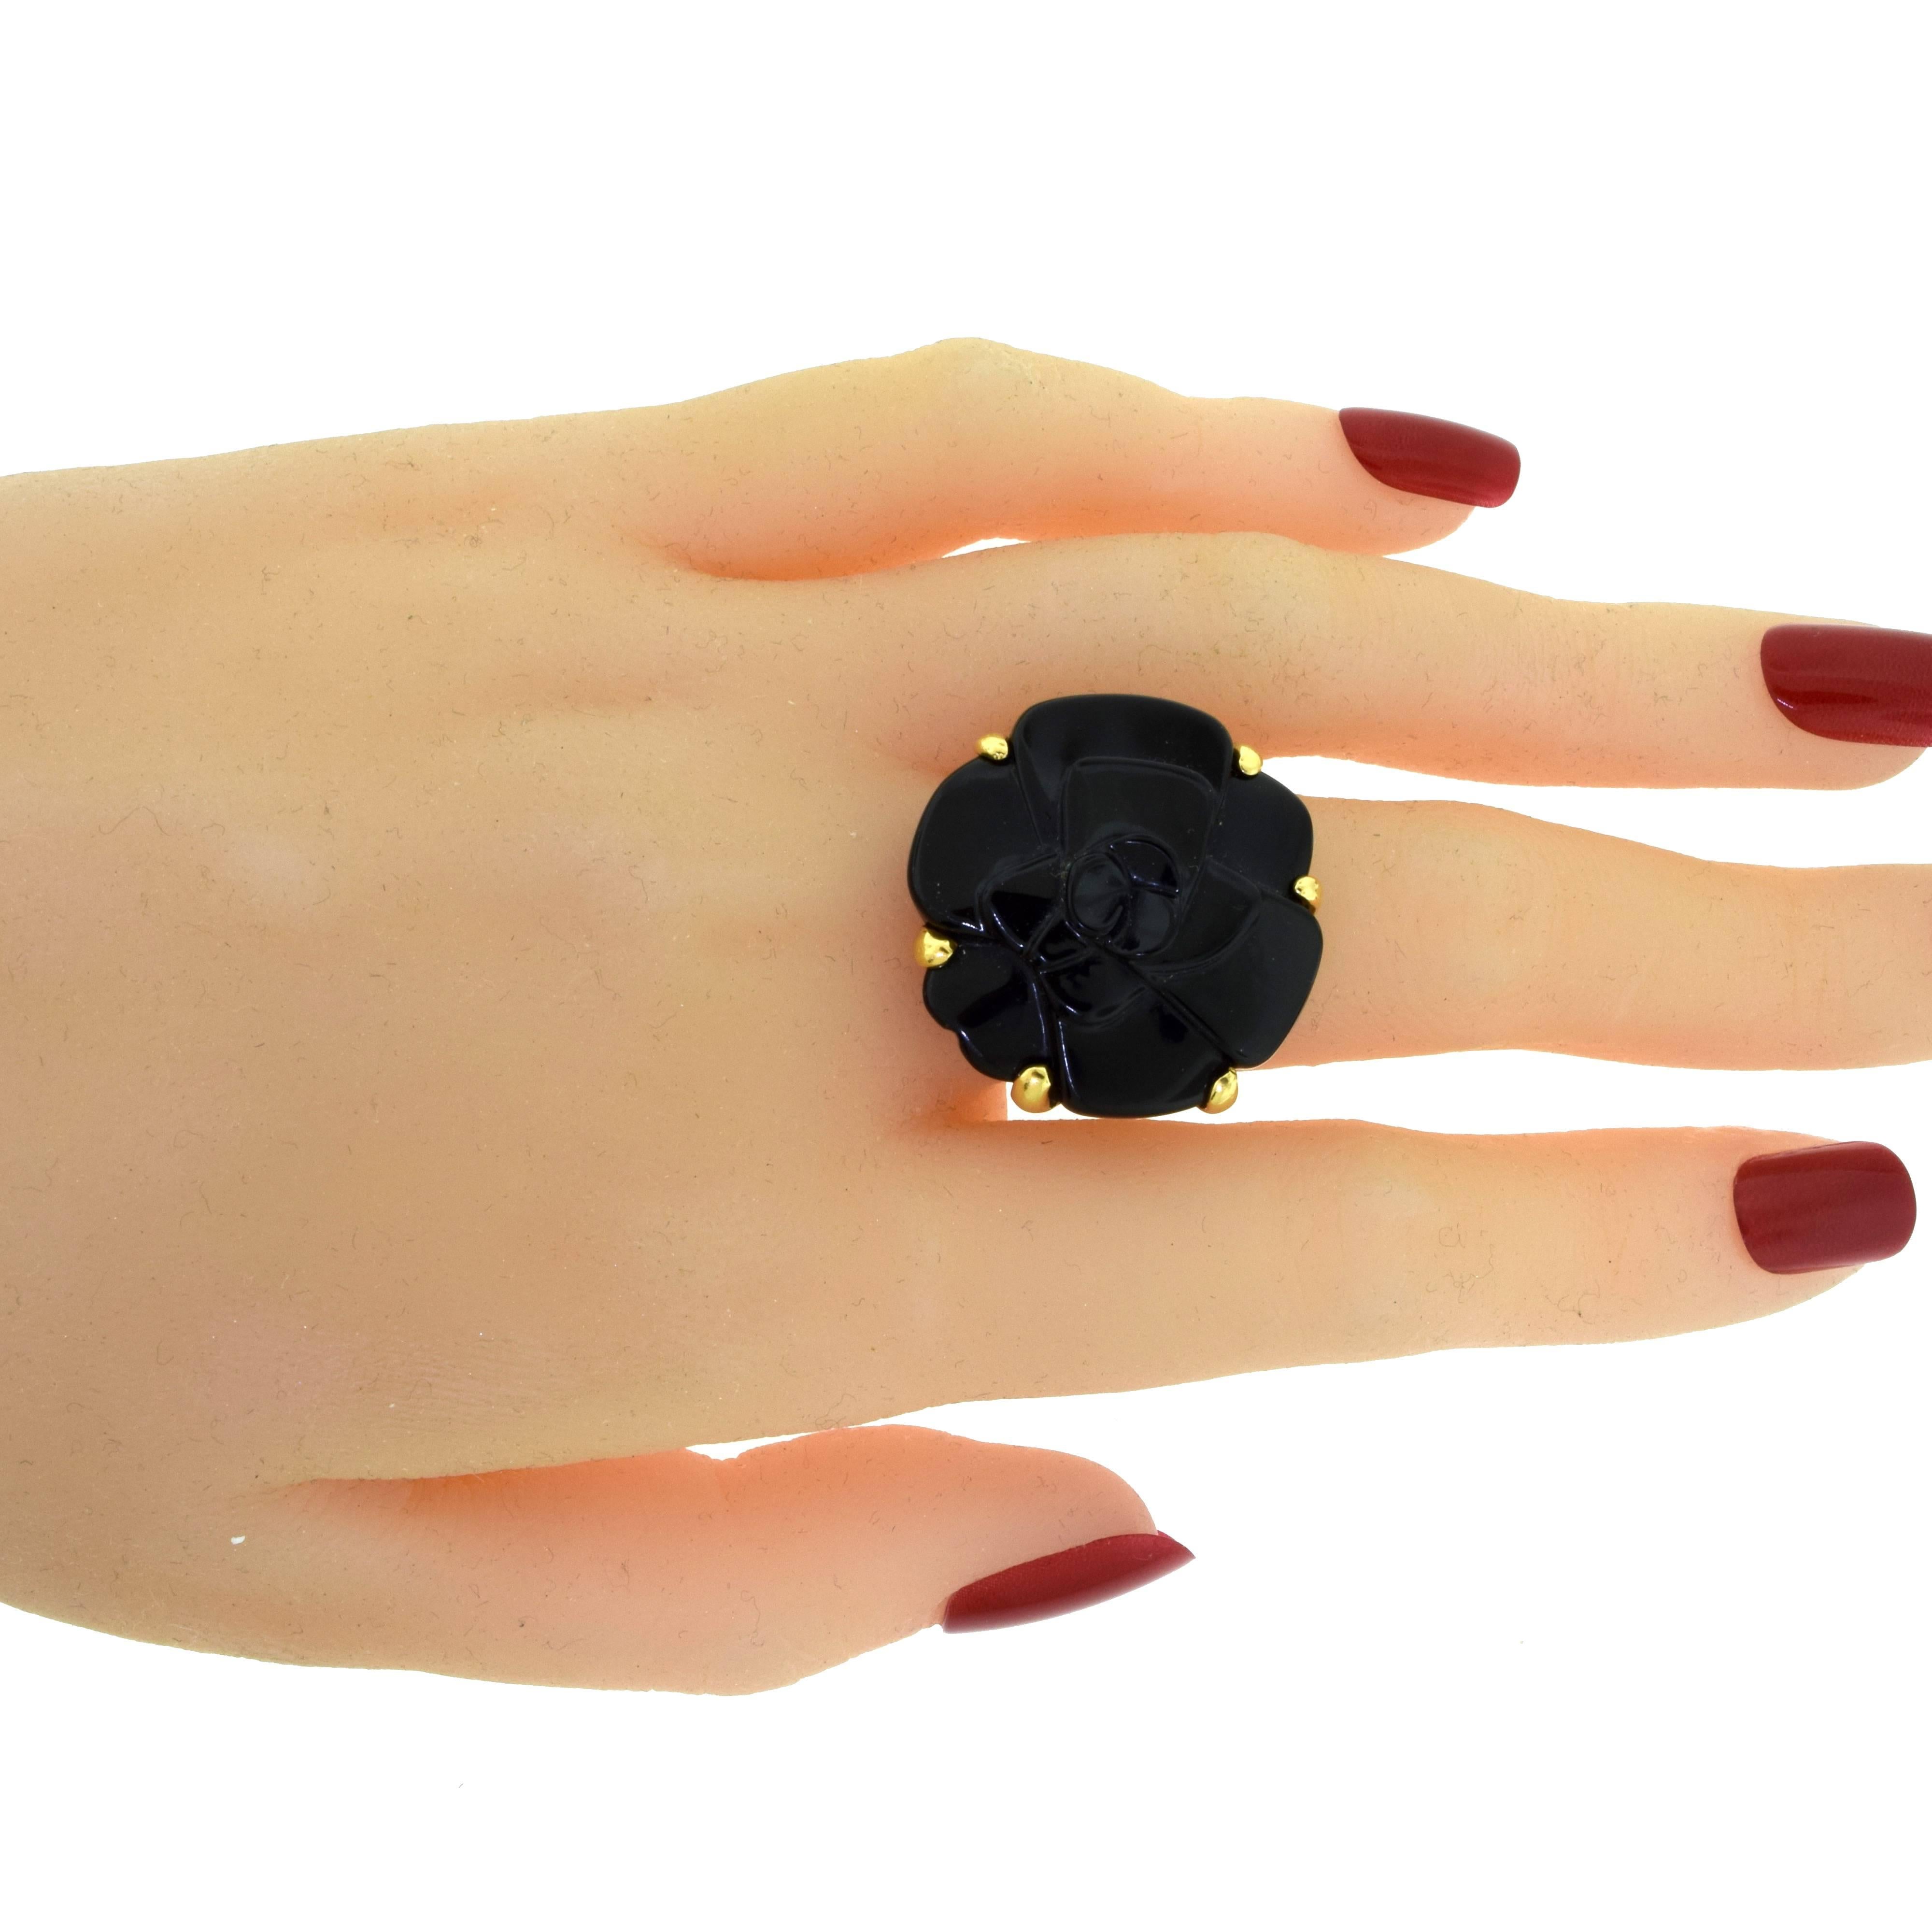 From Chanel's Camellia Collection:

Ring Size: 5.75
Metal: 18 Karat Yellow Gold
Stones: 1 Large Carved Black Onyx Stone
Total Item Weight (g): 14.7
Onyx Dimensions: approx. 24.90 x 25.61 mm
Onyx Thickness: approx. 5.75 mm
Hallmark: CHANEL Serial No.